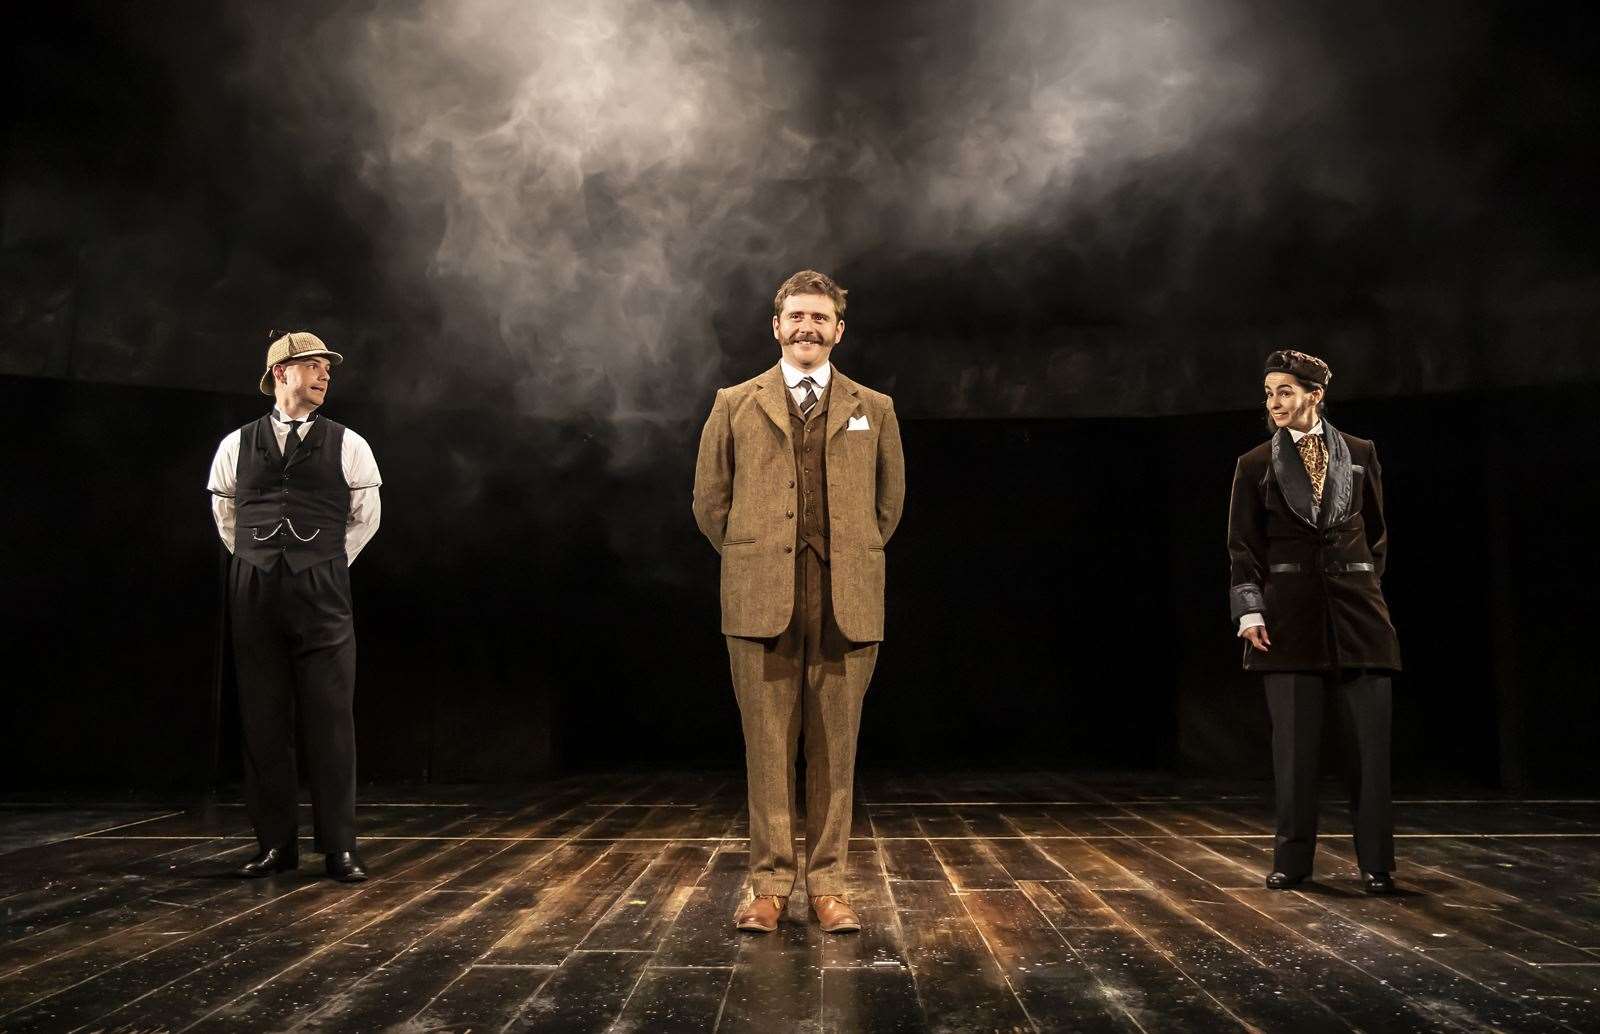 The Hound Of The Baskervilles opens in Aberdeen on Tuesday.